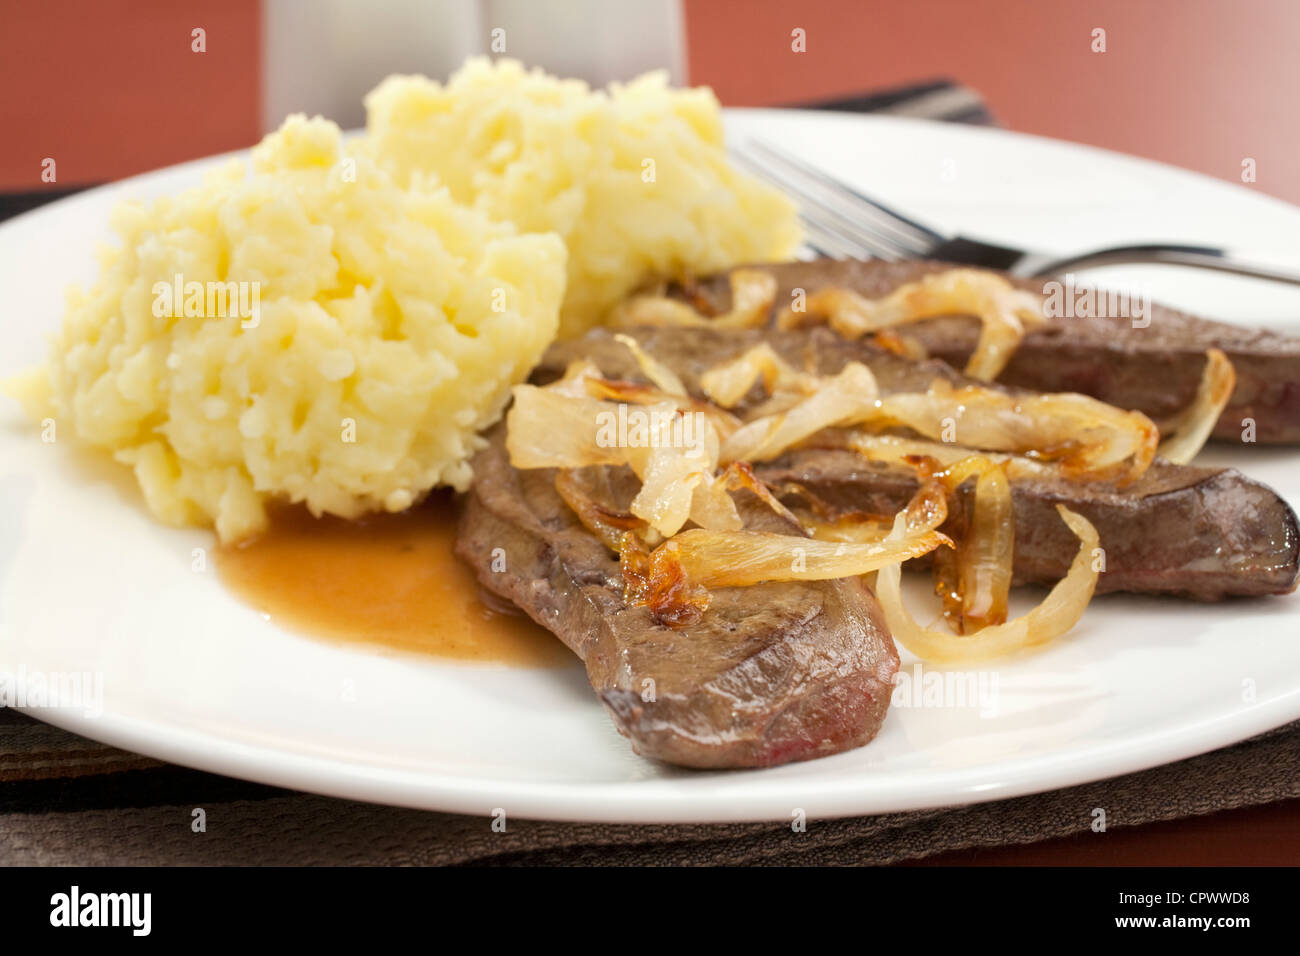 lambs-liver-with-caramelised-onions-and-mashed-potato-on-a-white-plate-CPWWD8.jpg